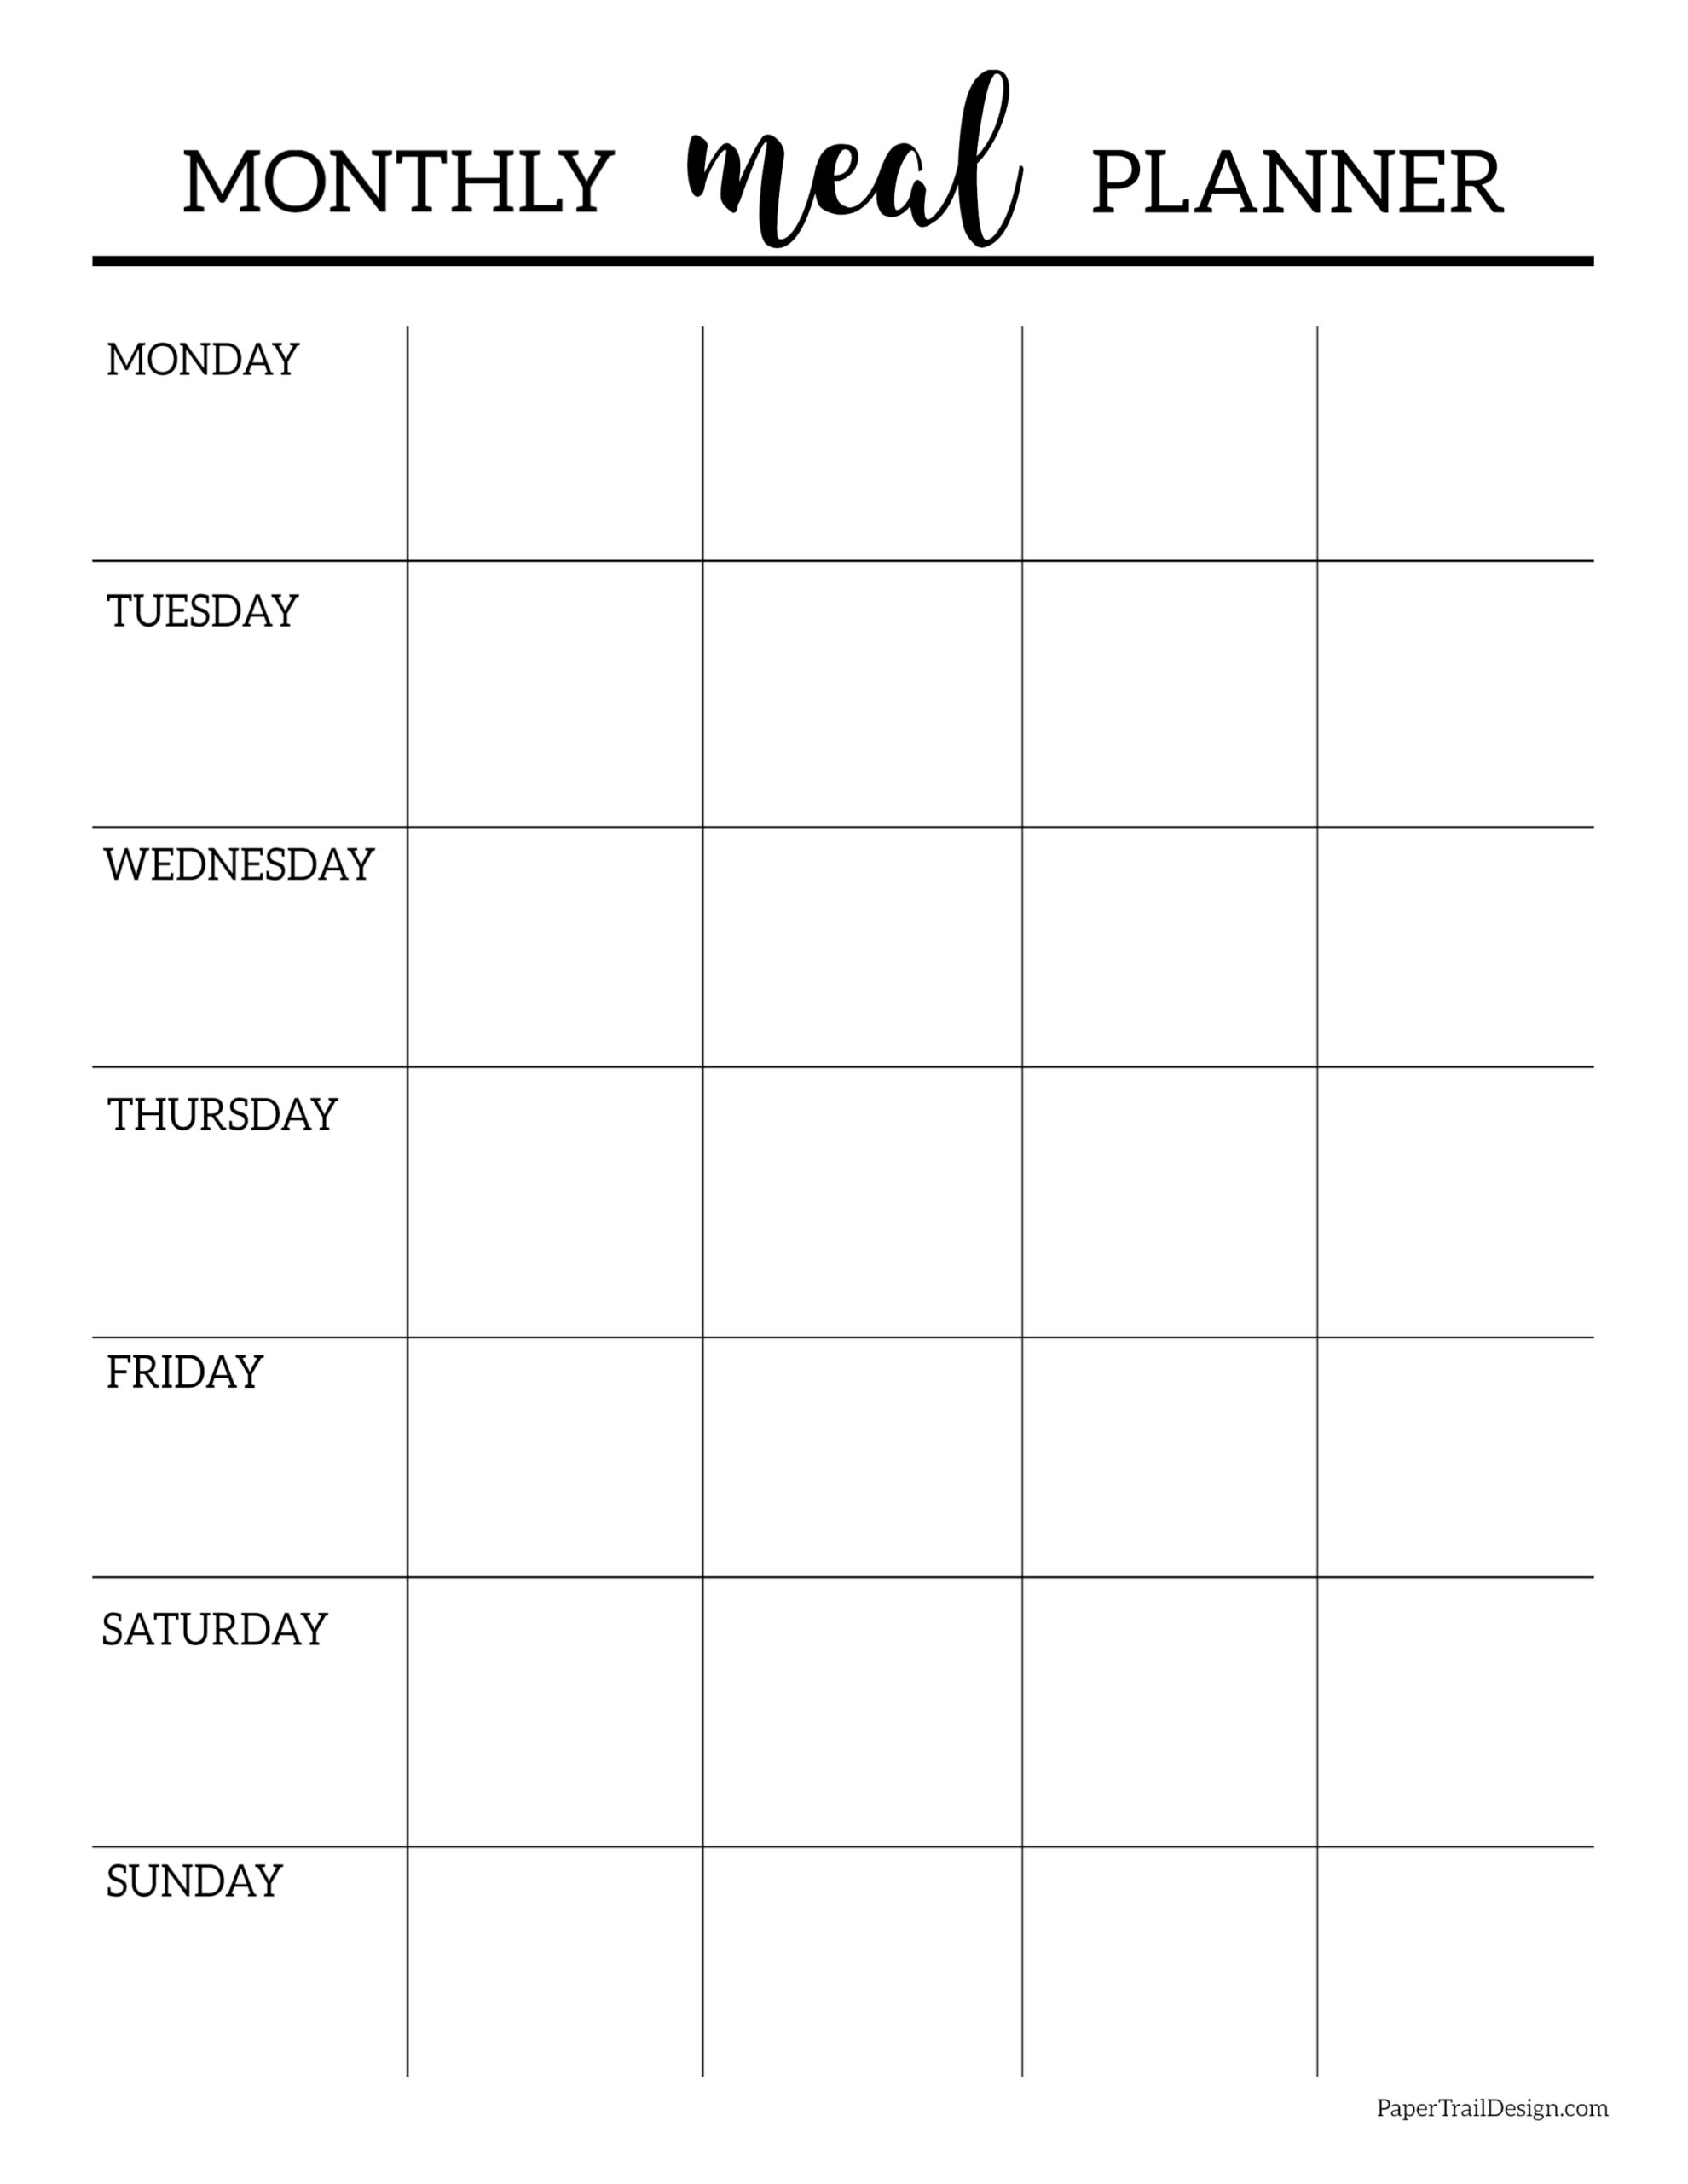 Free Monthly Meal Plan Printable